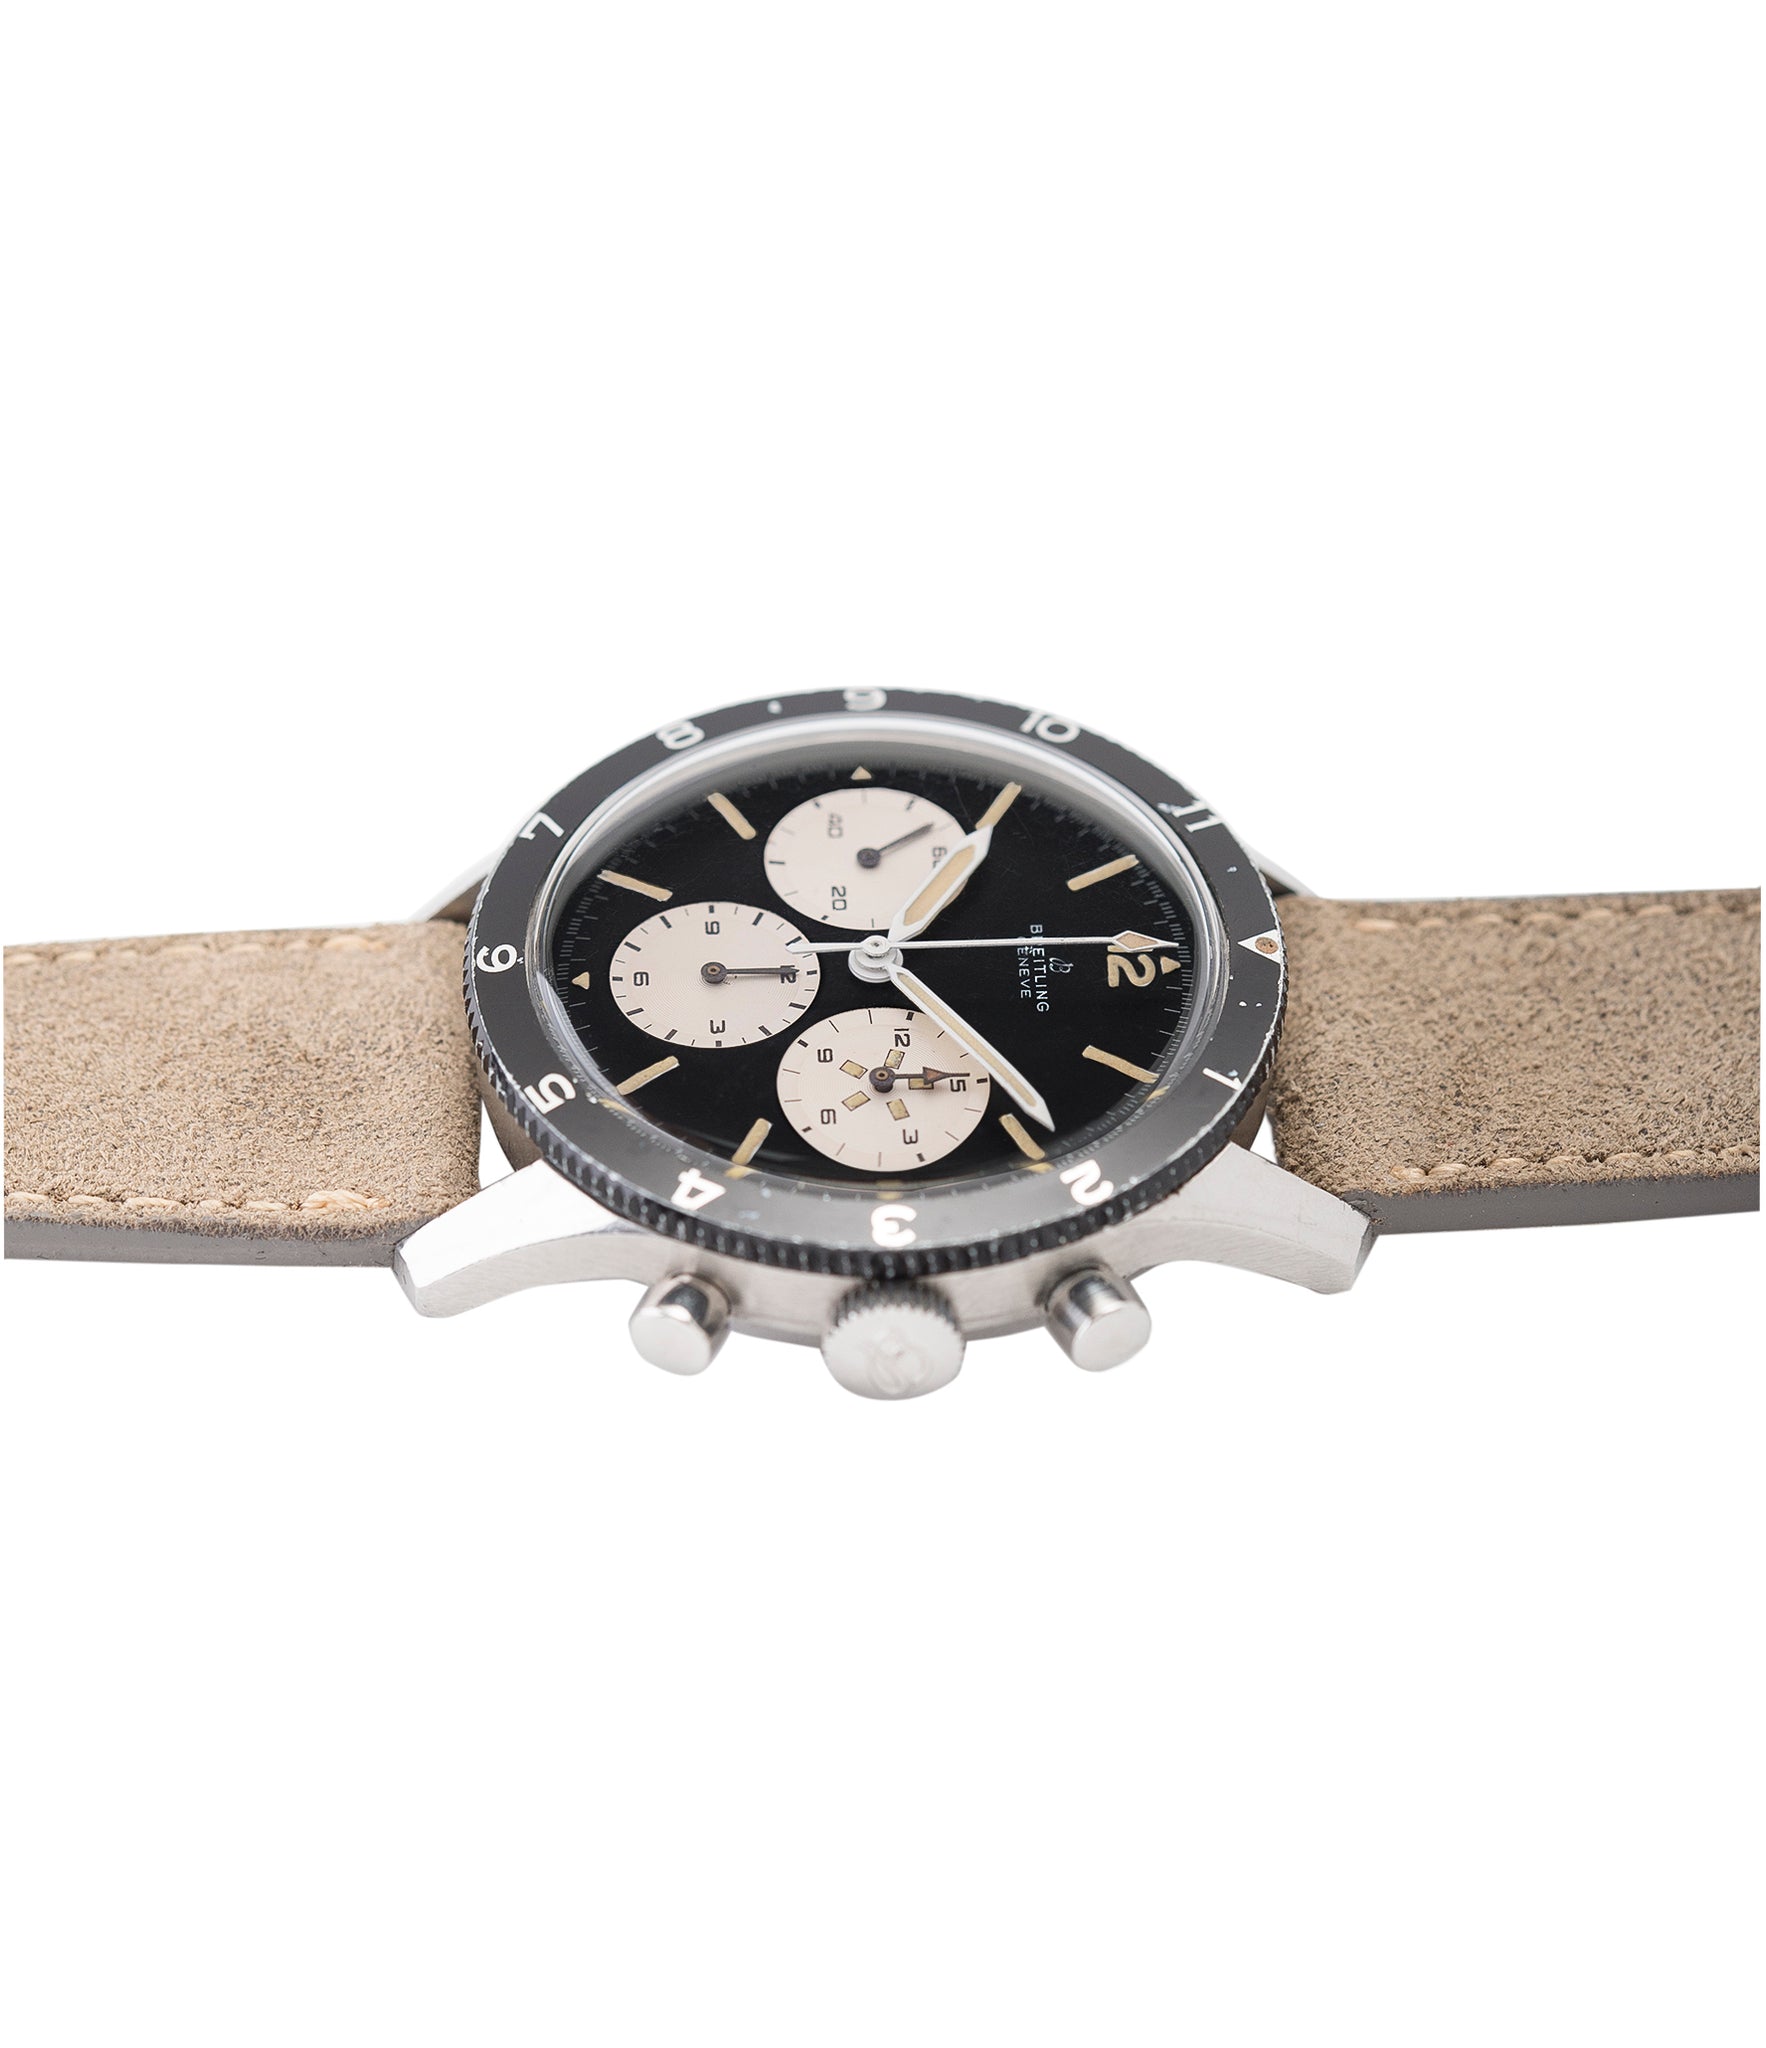 buying Breitling 765 AVI pilot steel vintage chronograph watch online at A Collected Man London UK specialist of rare vintage watches